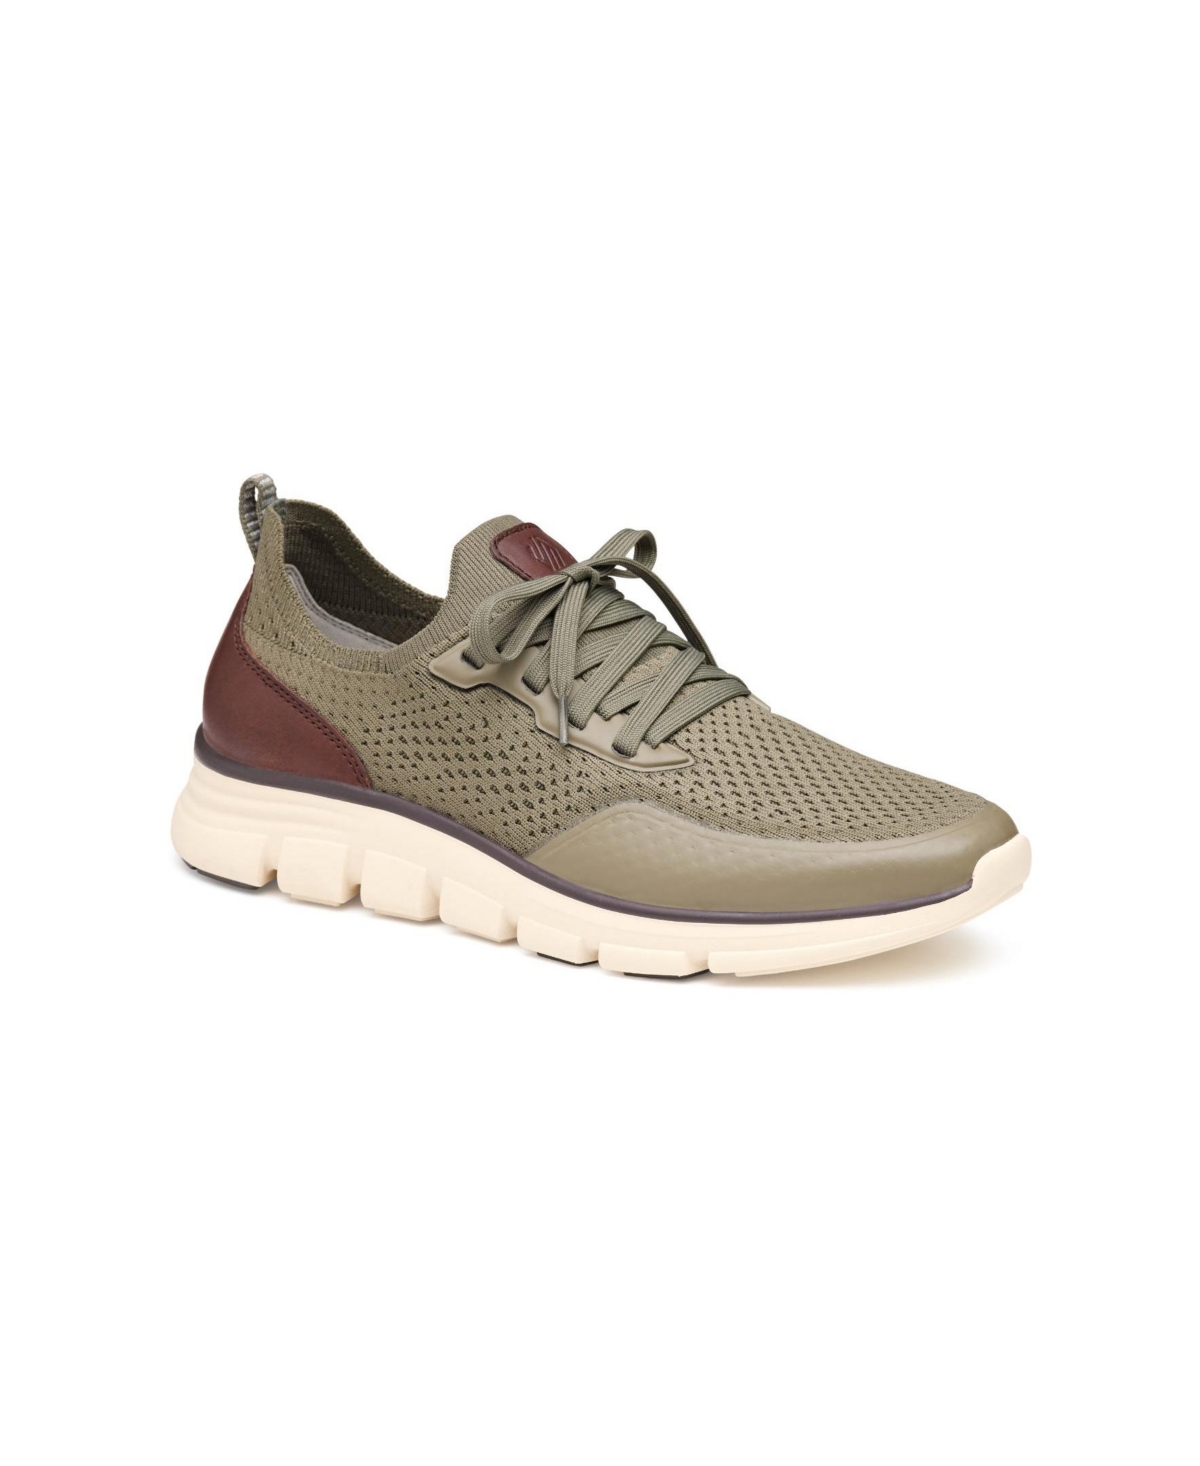 Johnston & Murphy Men's Amherst Lug Sport Lace-up Sneakers In Olive Knit